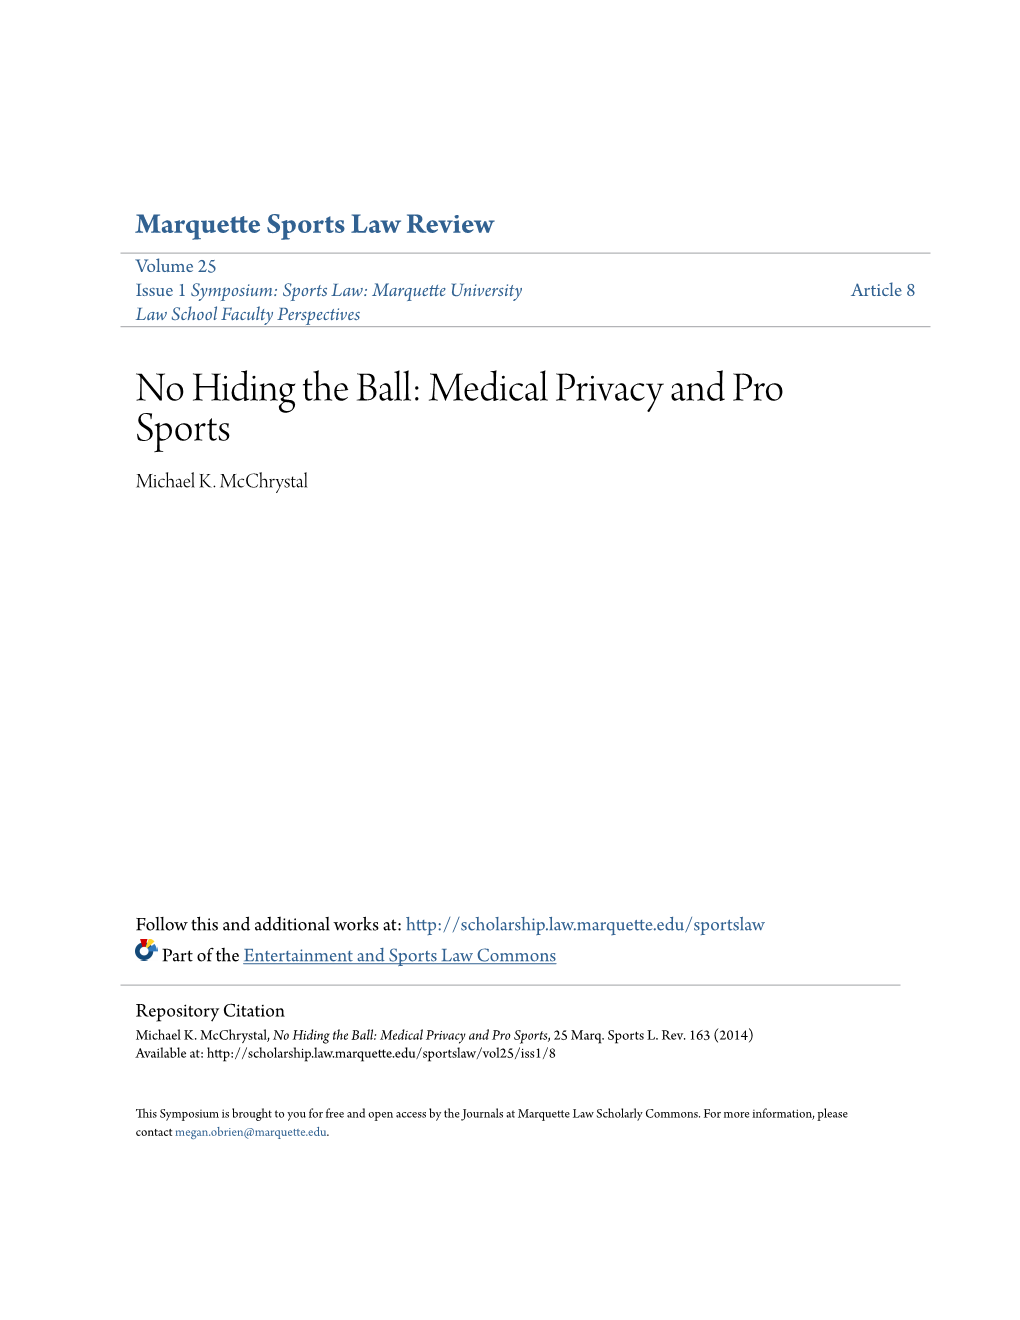 No Hiding the Ball: Medical Privacy and Pro Sports Michael K